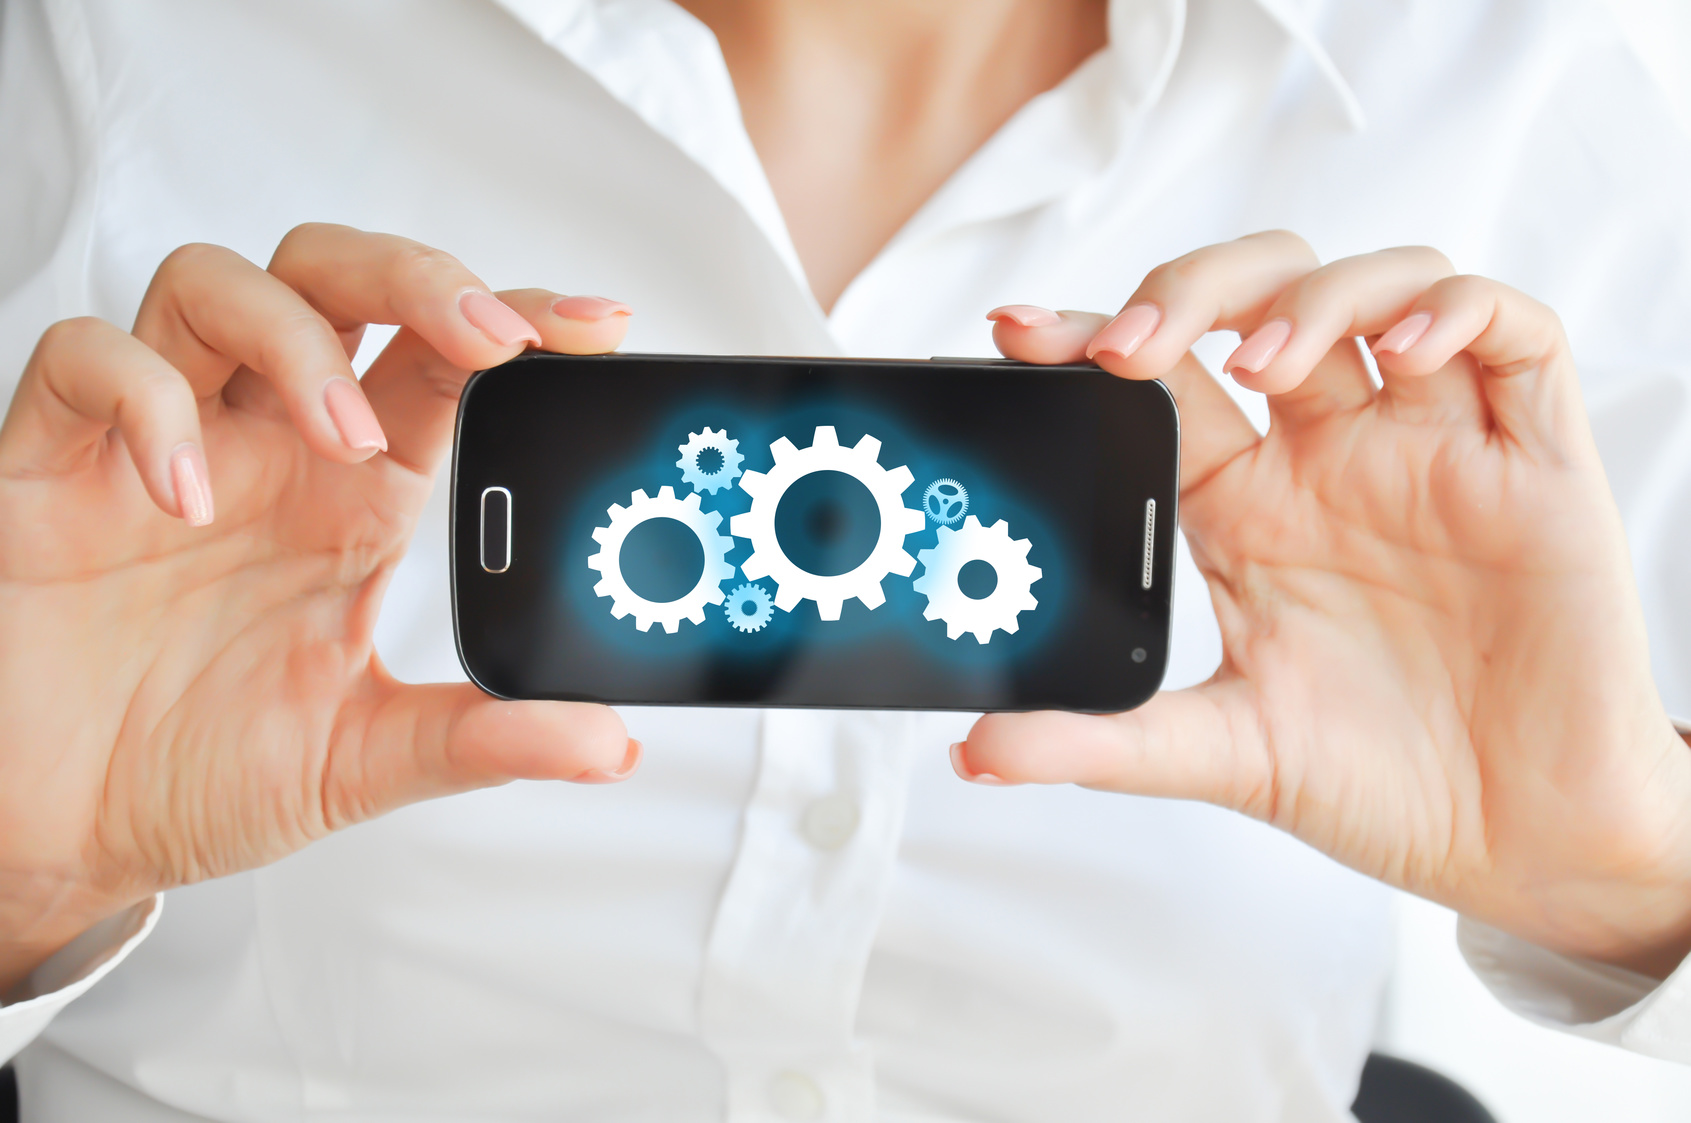 Using mobile devices resources and capabilities to develop software